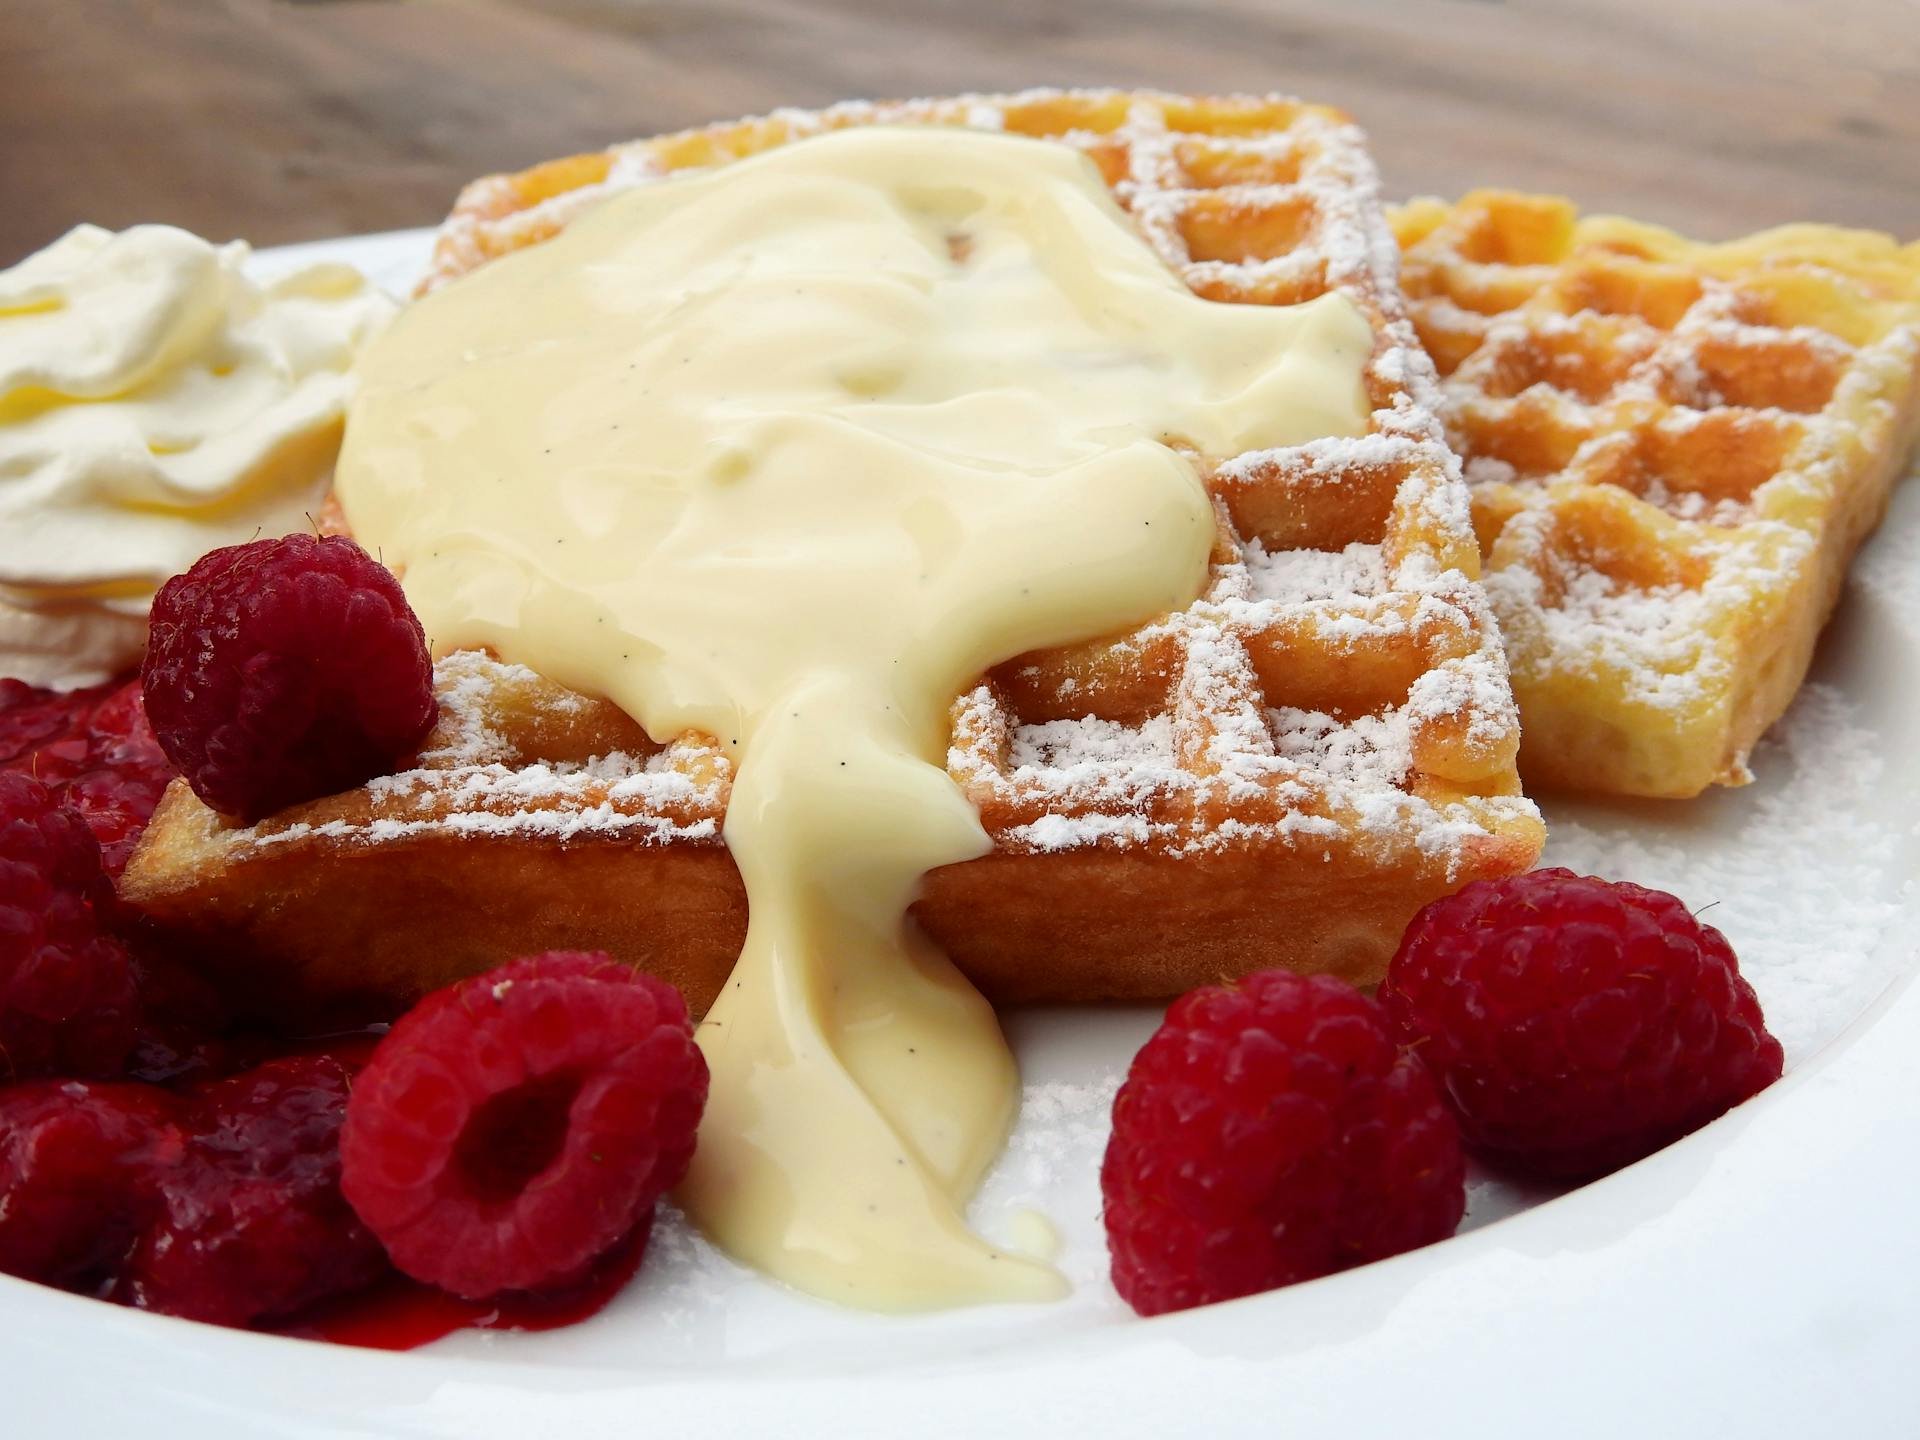 Waffles and ice cream | Source: Pexels